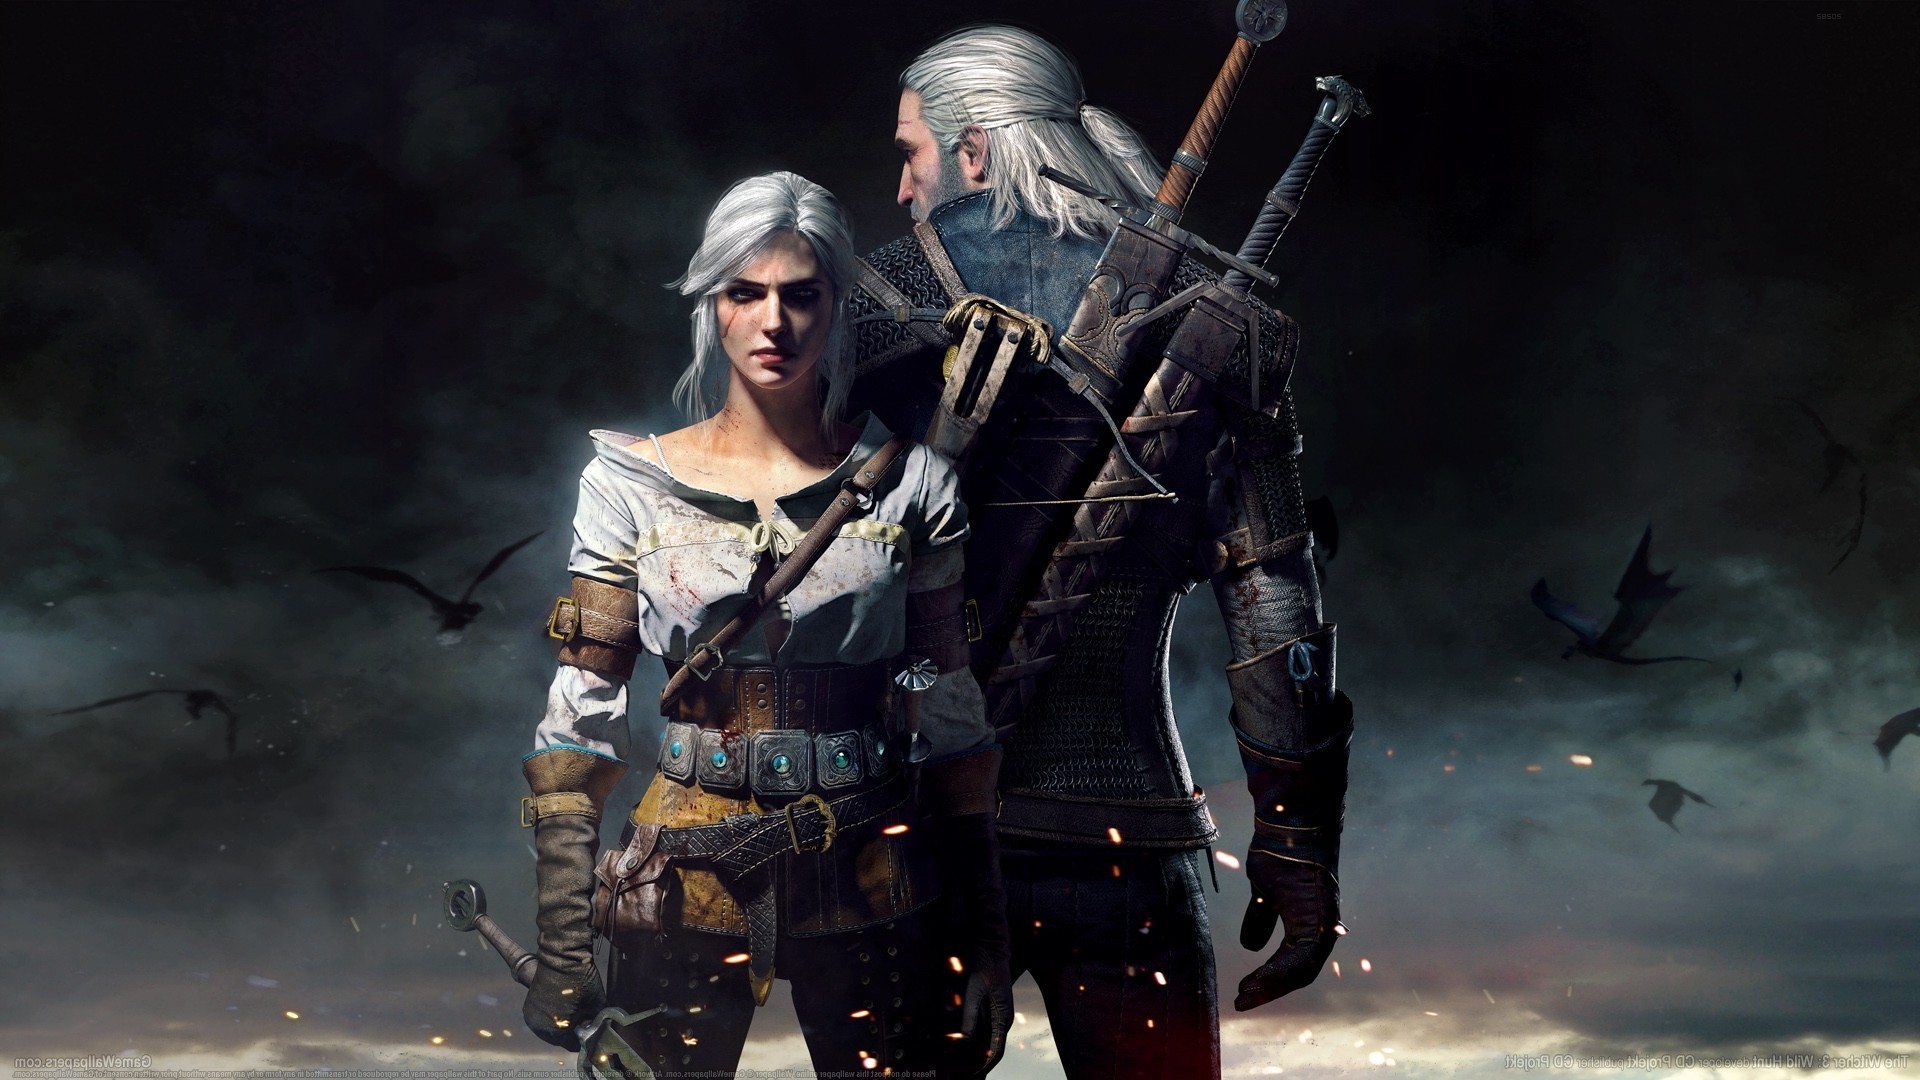 The Witcher 3: Wild Hunt Wallpapers HD / Desktop and Mobile Backgrounds